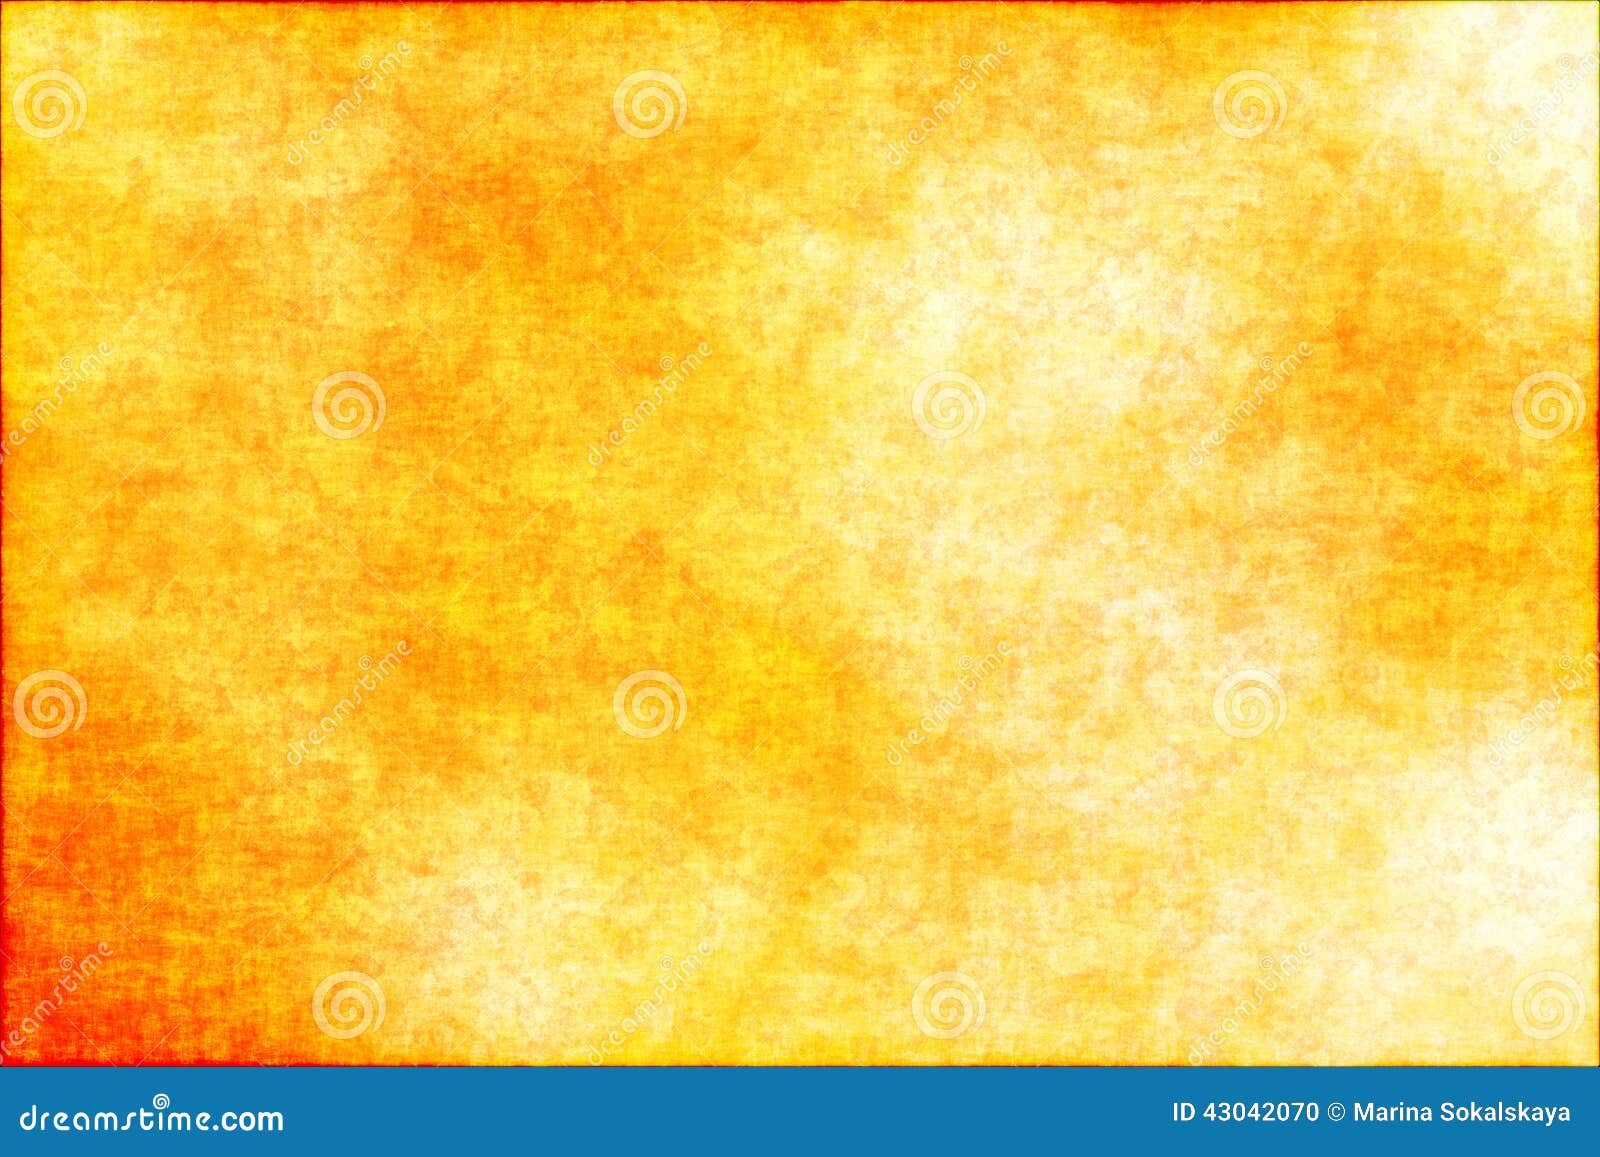 Abstract Yellow Grunge Background Stock Photo - Image of abstract,  textured: 43042070